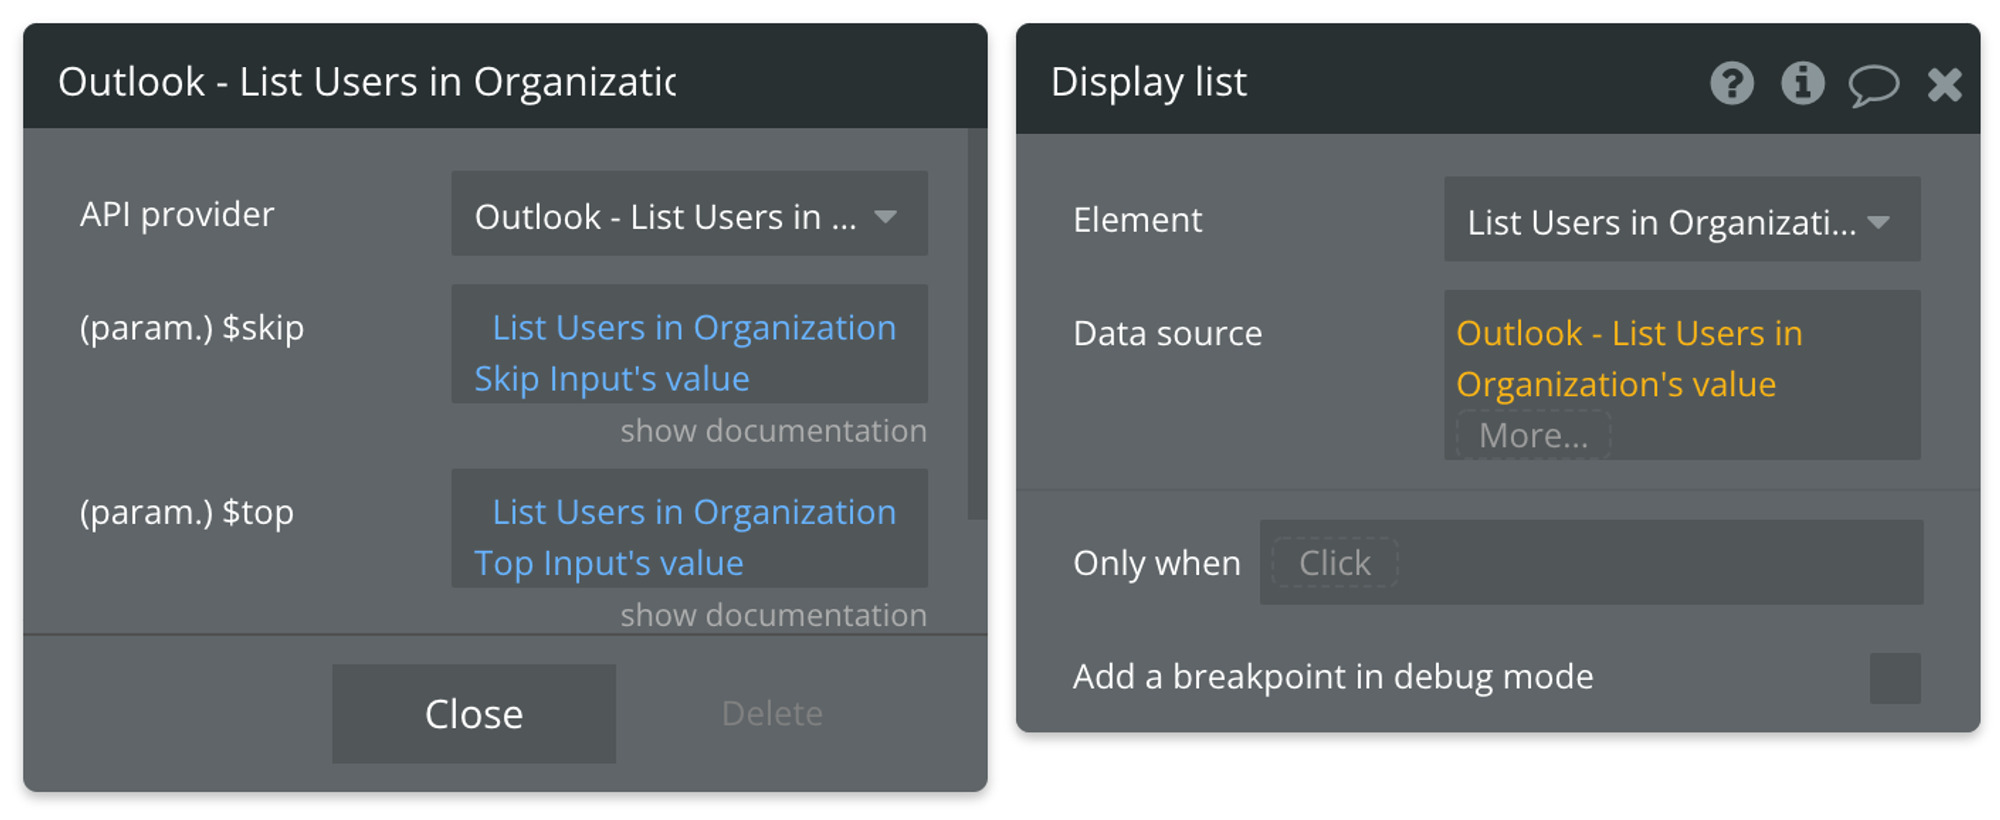 Select Outlook - List Users in Organization's value for the data source